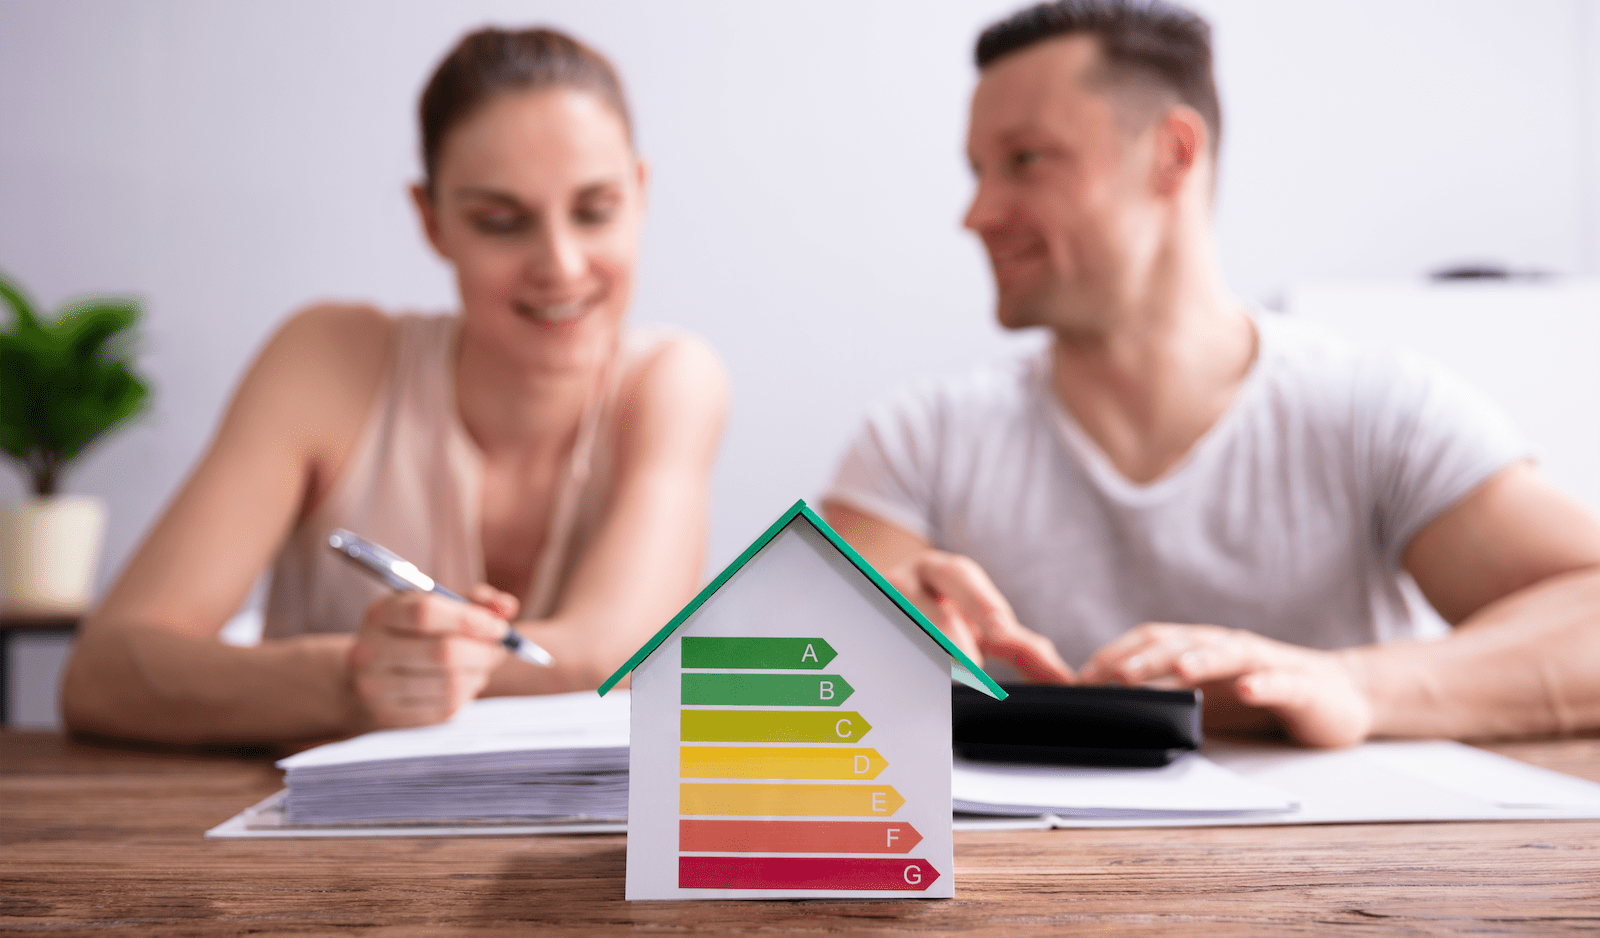 Homeowners assessing green building options for home performance